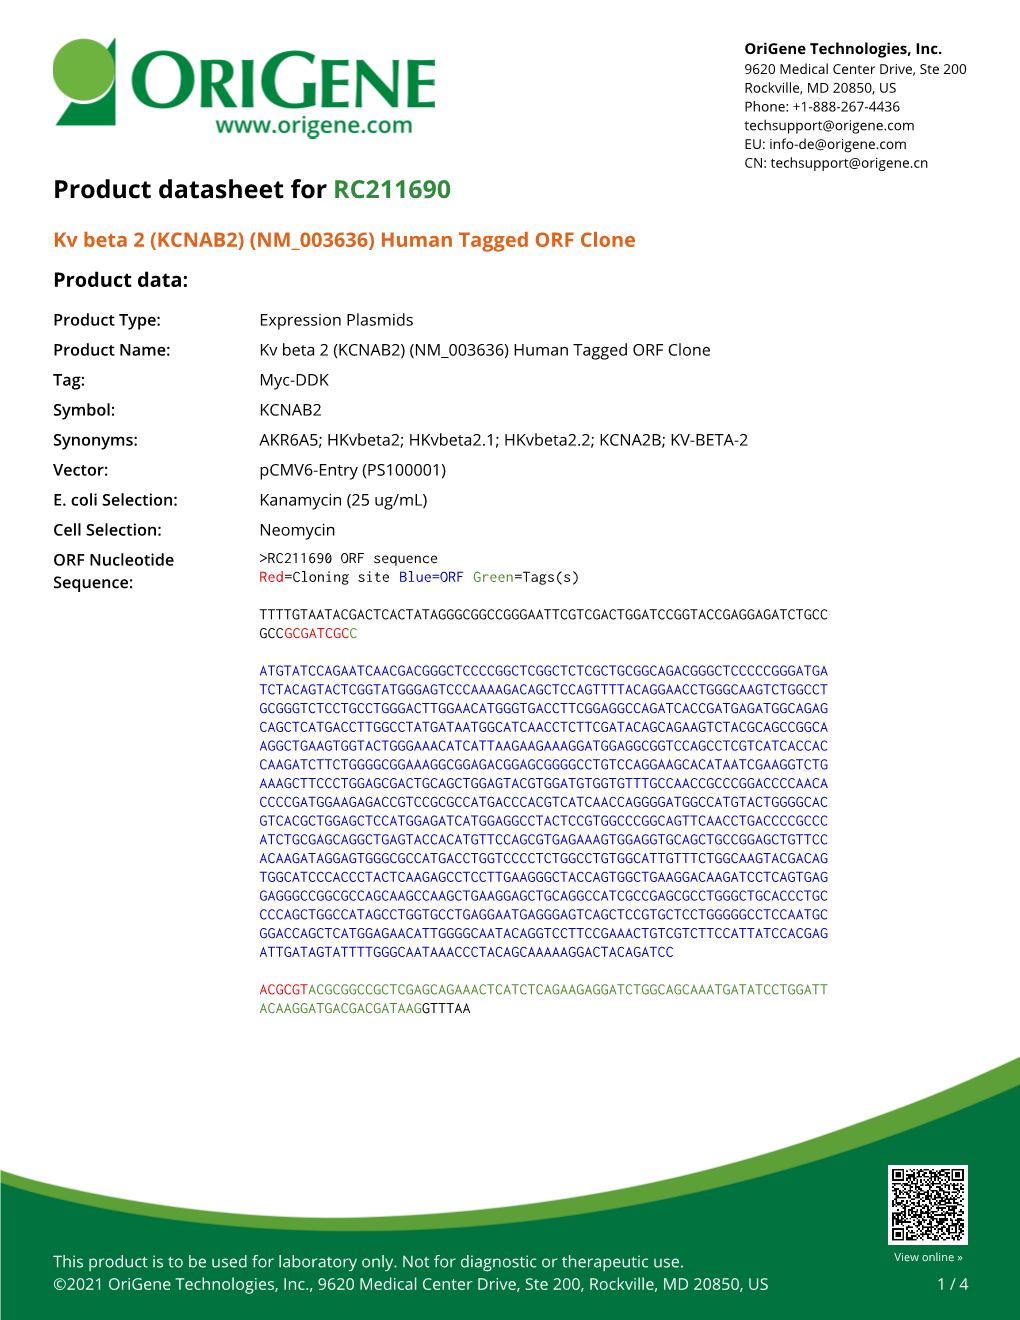 (KCNAB2) (NM 003636) Human Tagged ORF Clone Product Data